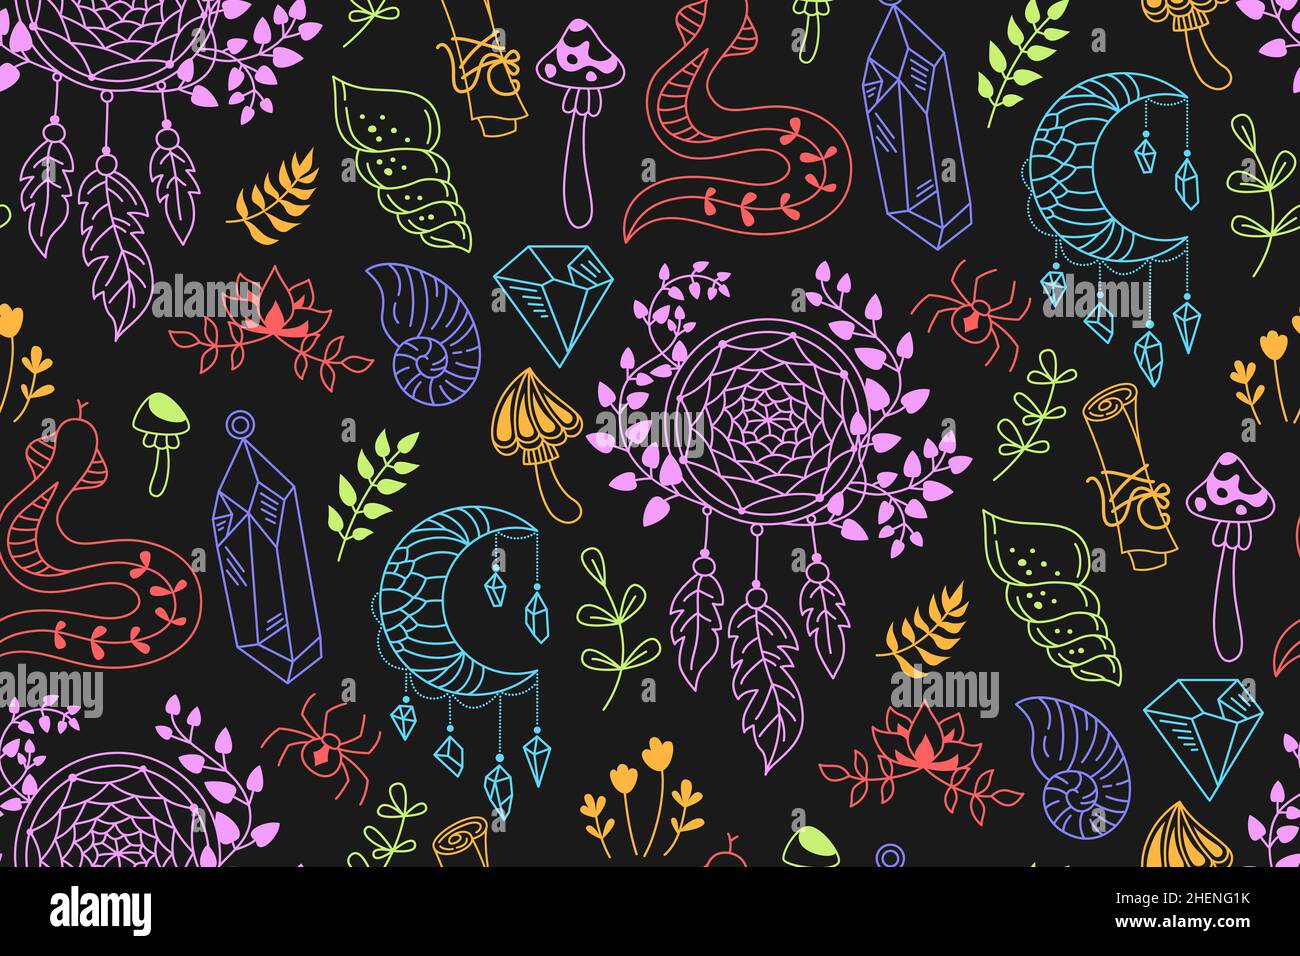 Mystic doodle wallpaper, witchcraft symbols crystal, shell, dreamcatcher, spider snake seamless pattern. Magician esoteric boundless ornament. Spiritual boho drawn print. Scrapbook occult witch vector Stock Vector